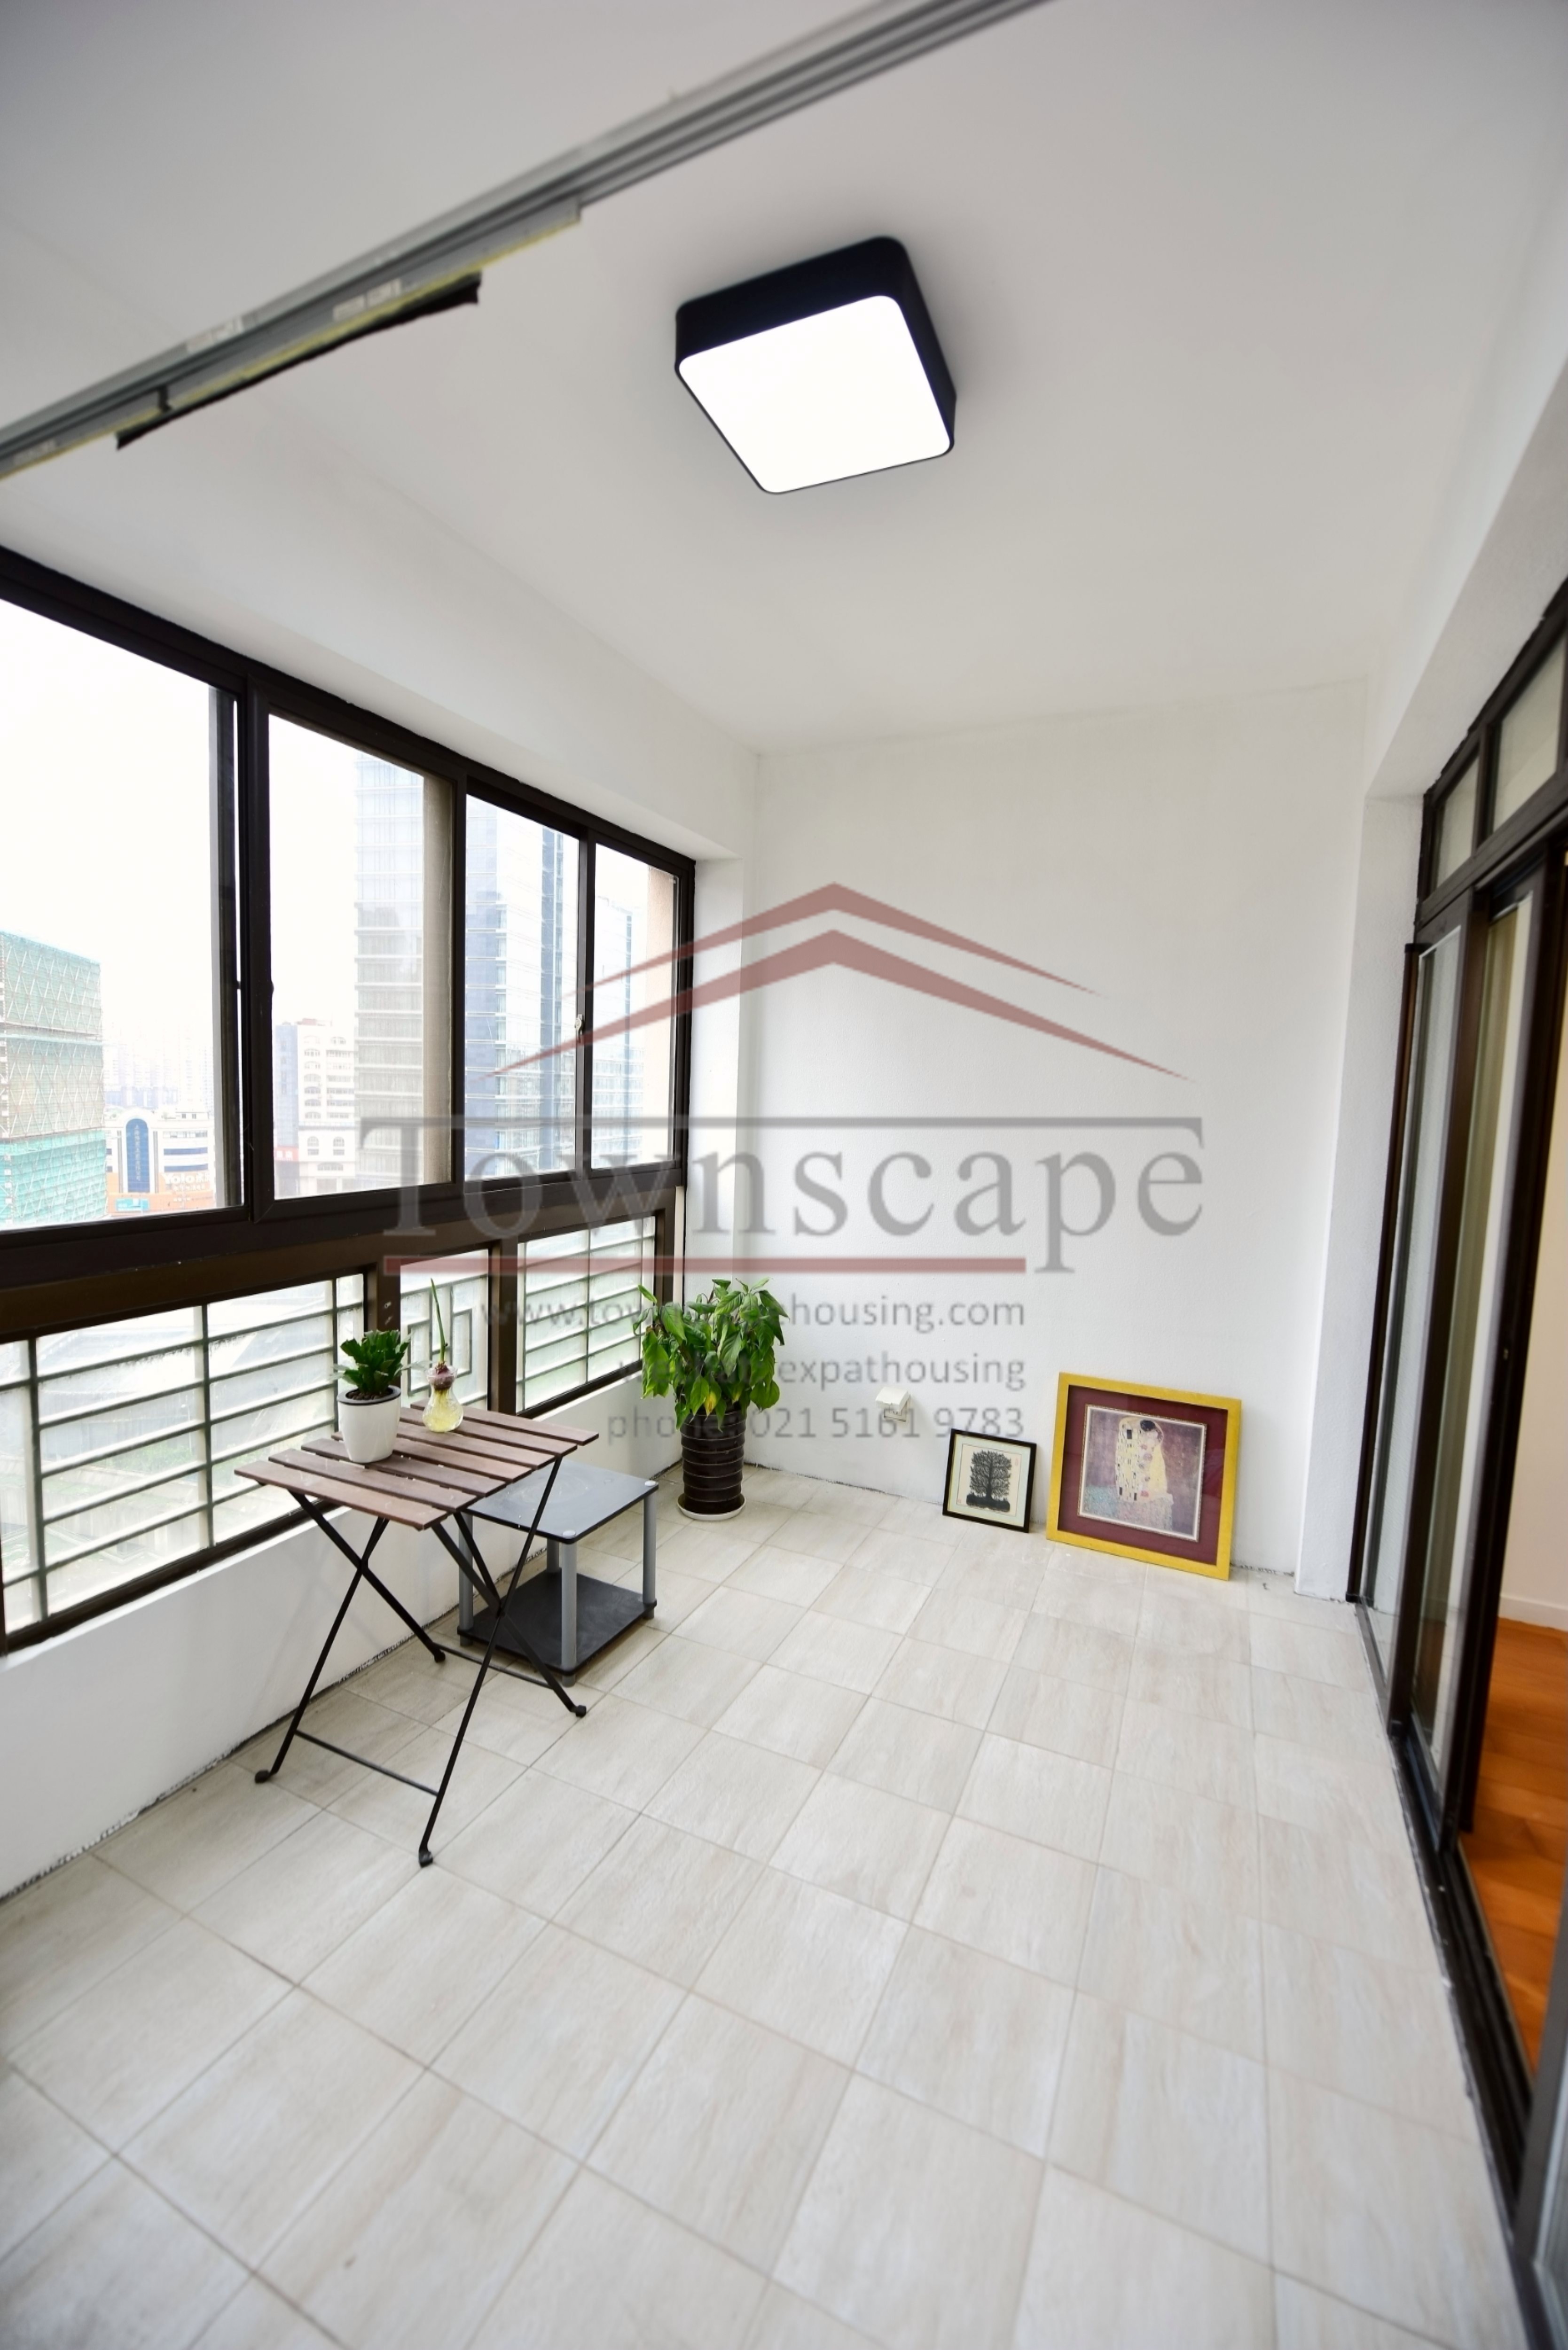  2 BR Xintiandi Oasis at an Affordable Price